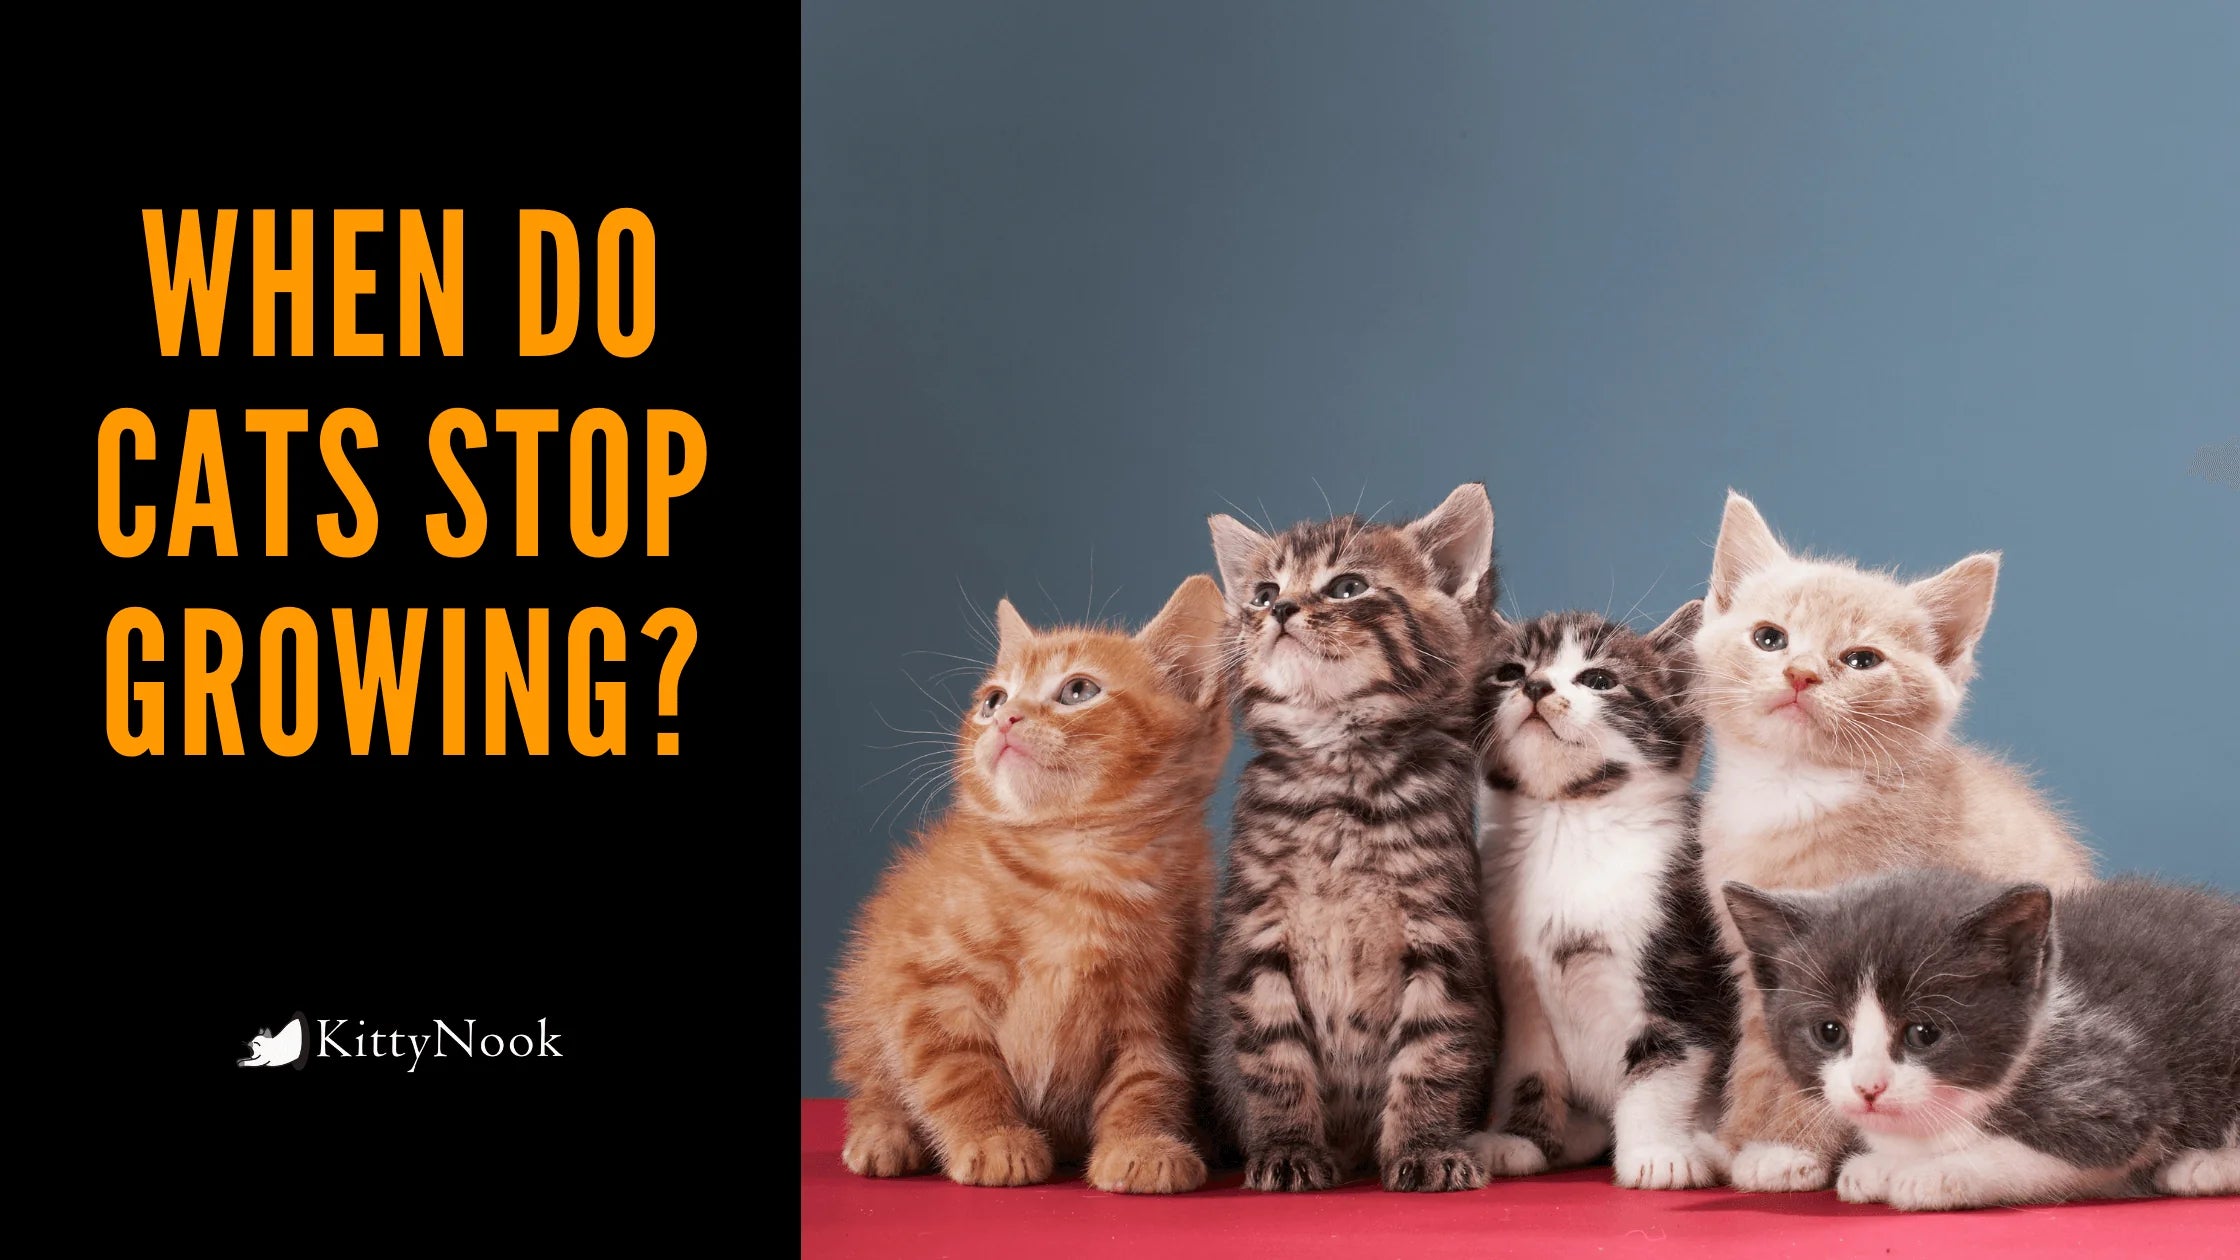 When Do Cats Stop Growing? - KittyNook Cat Company